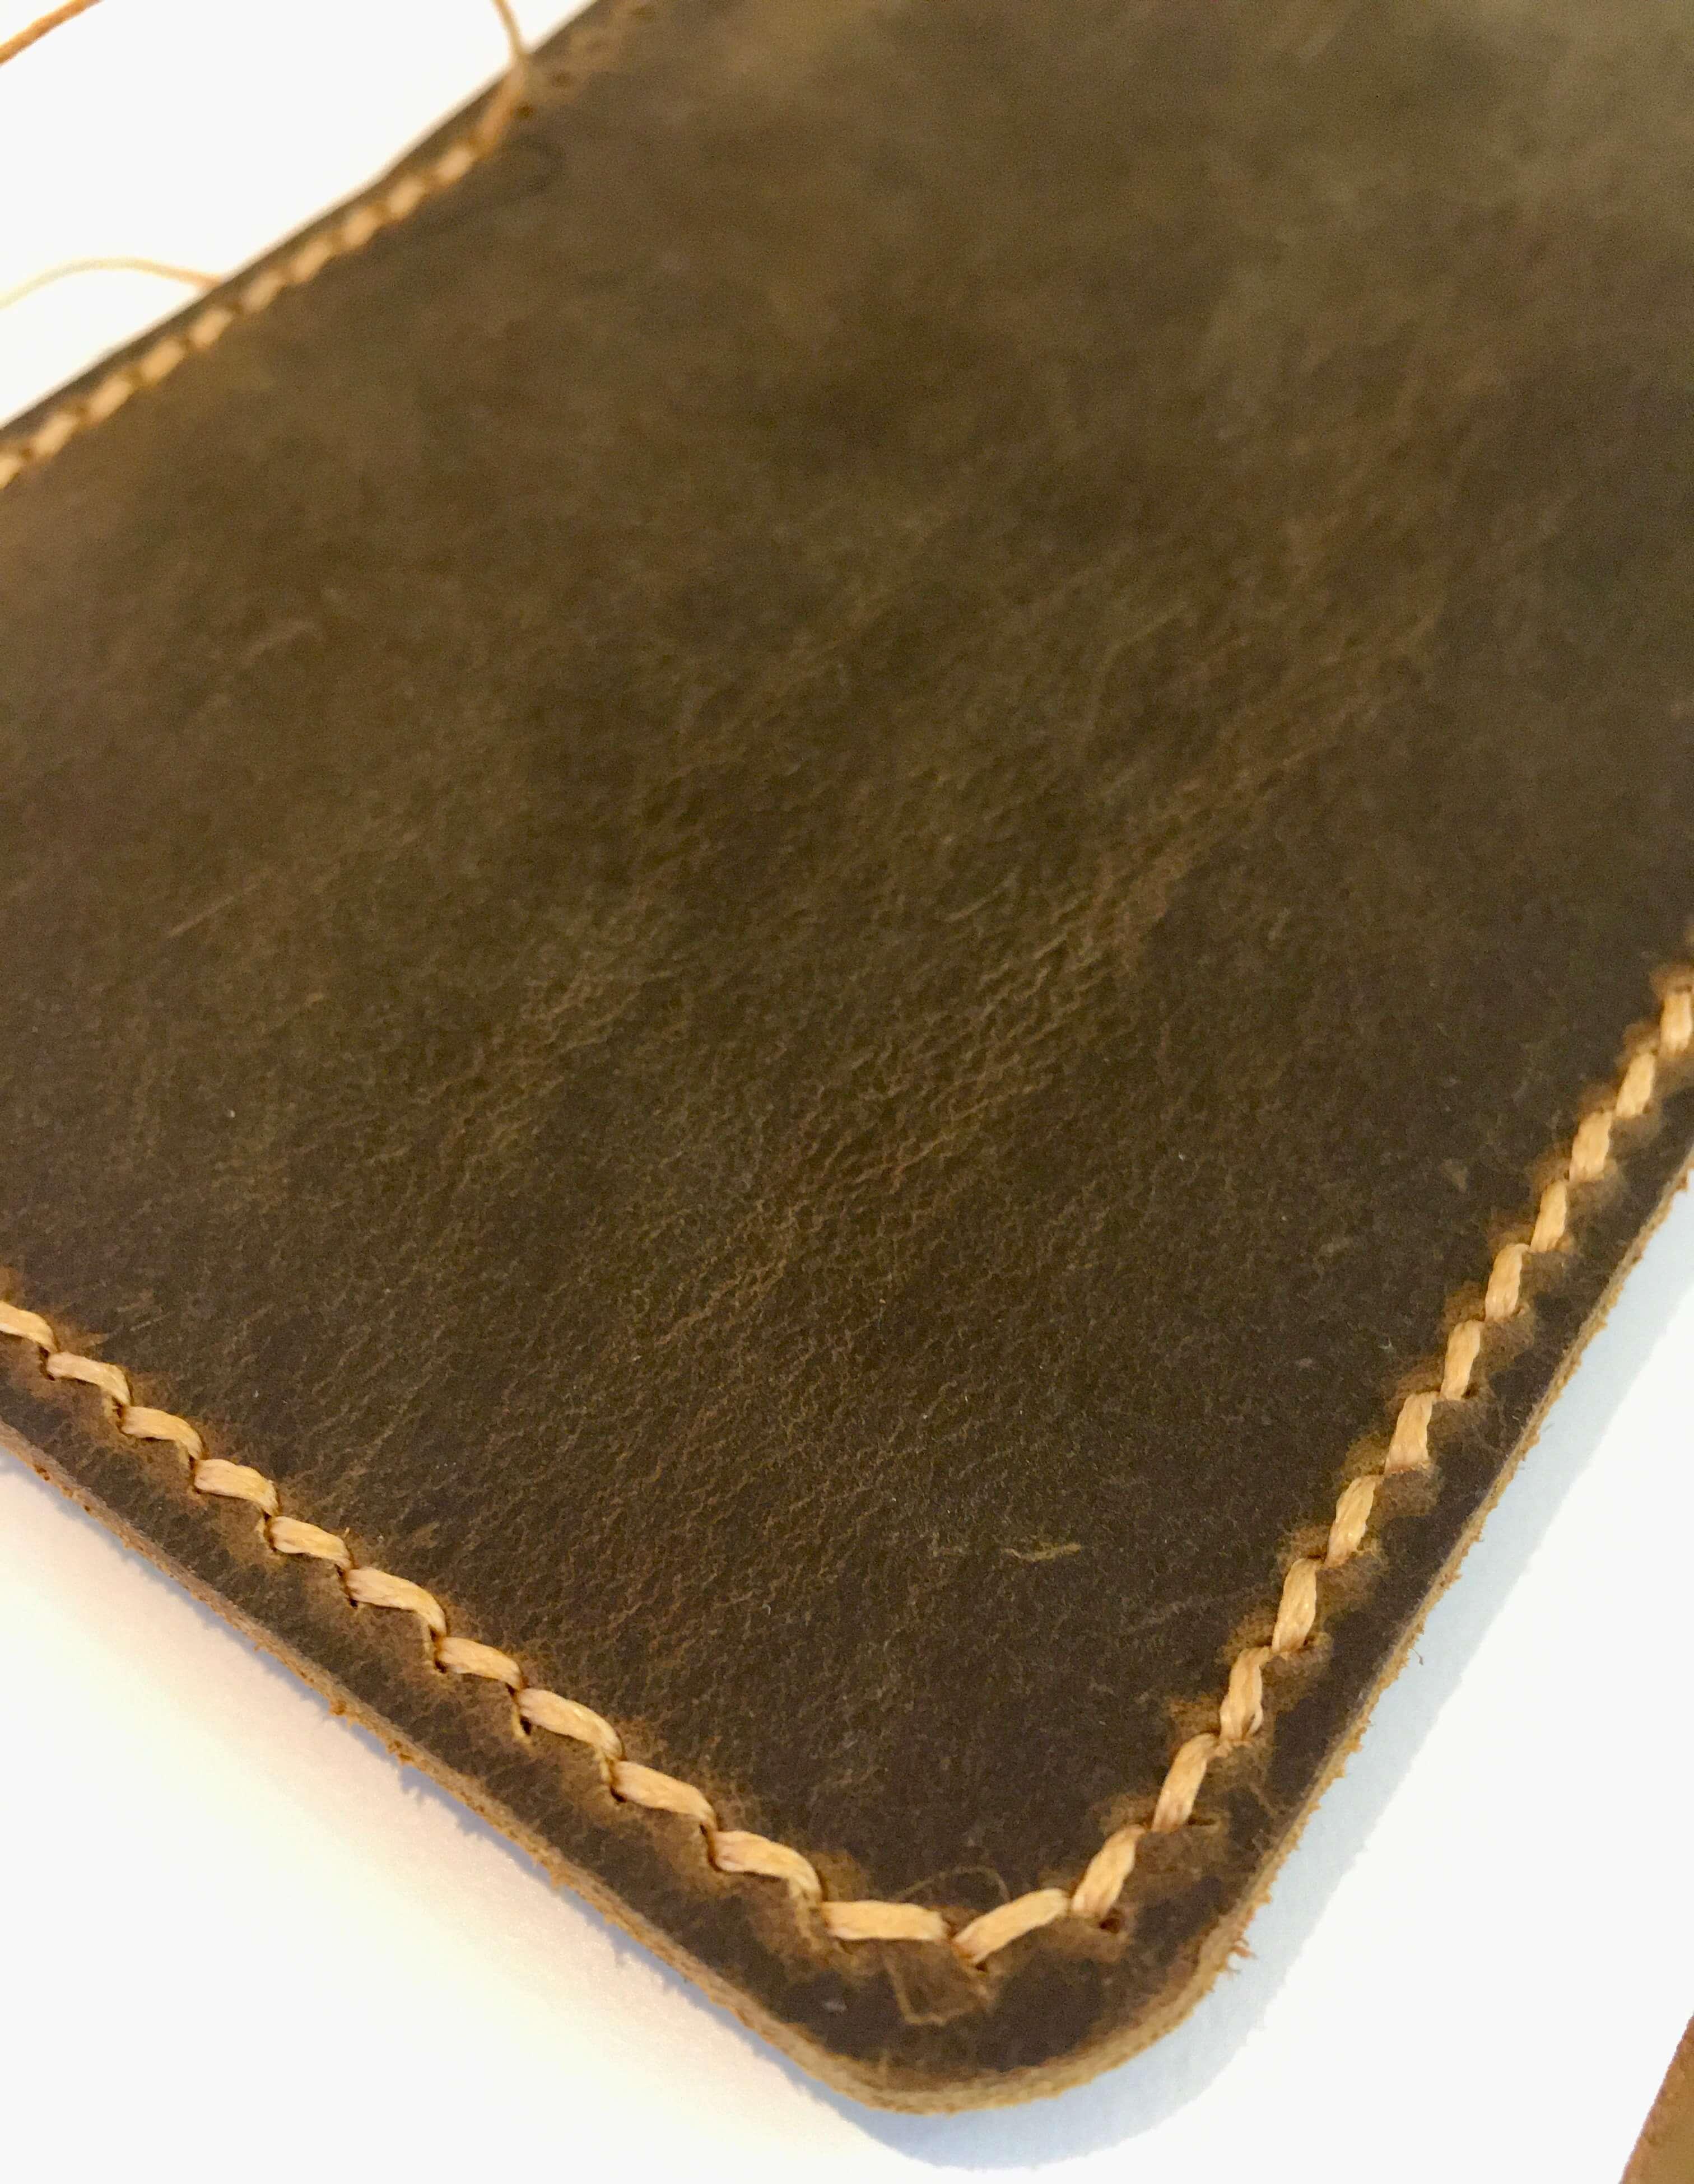 Types of leather finishes - Leatherwork Conversation - Leatherworker.net